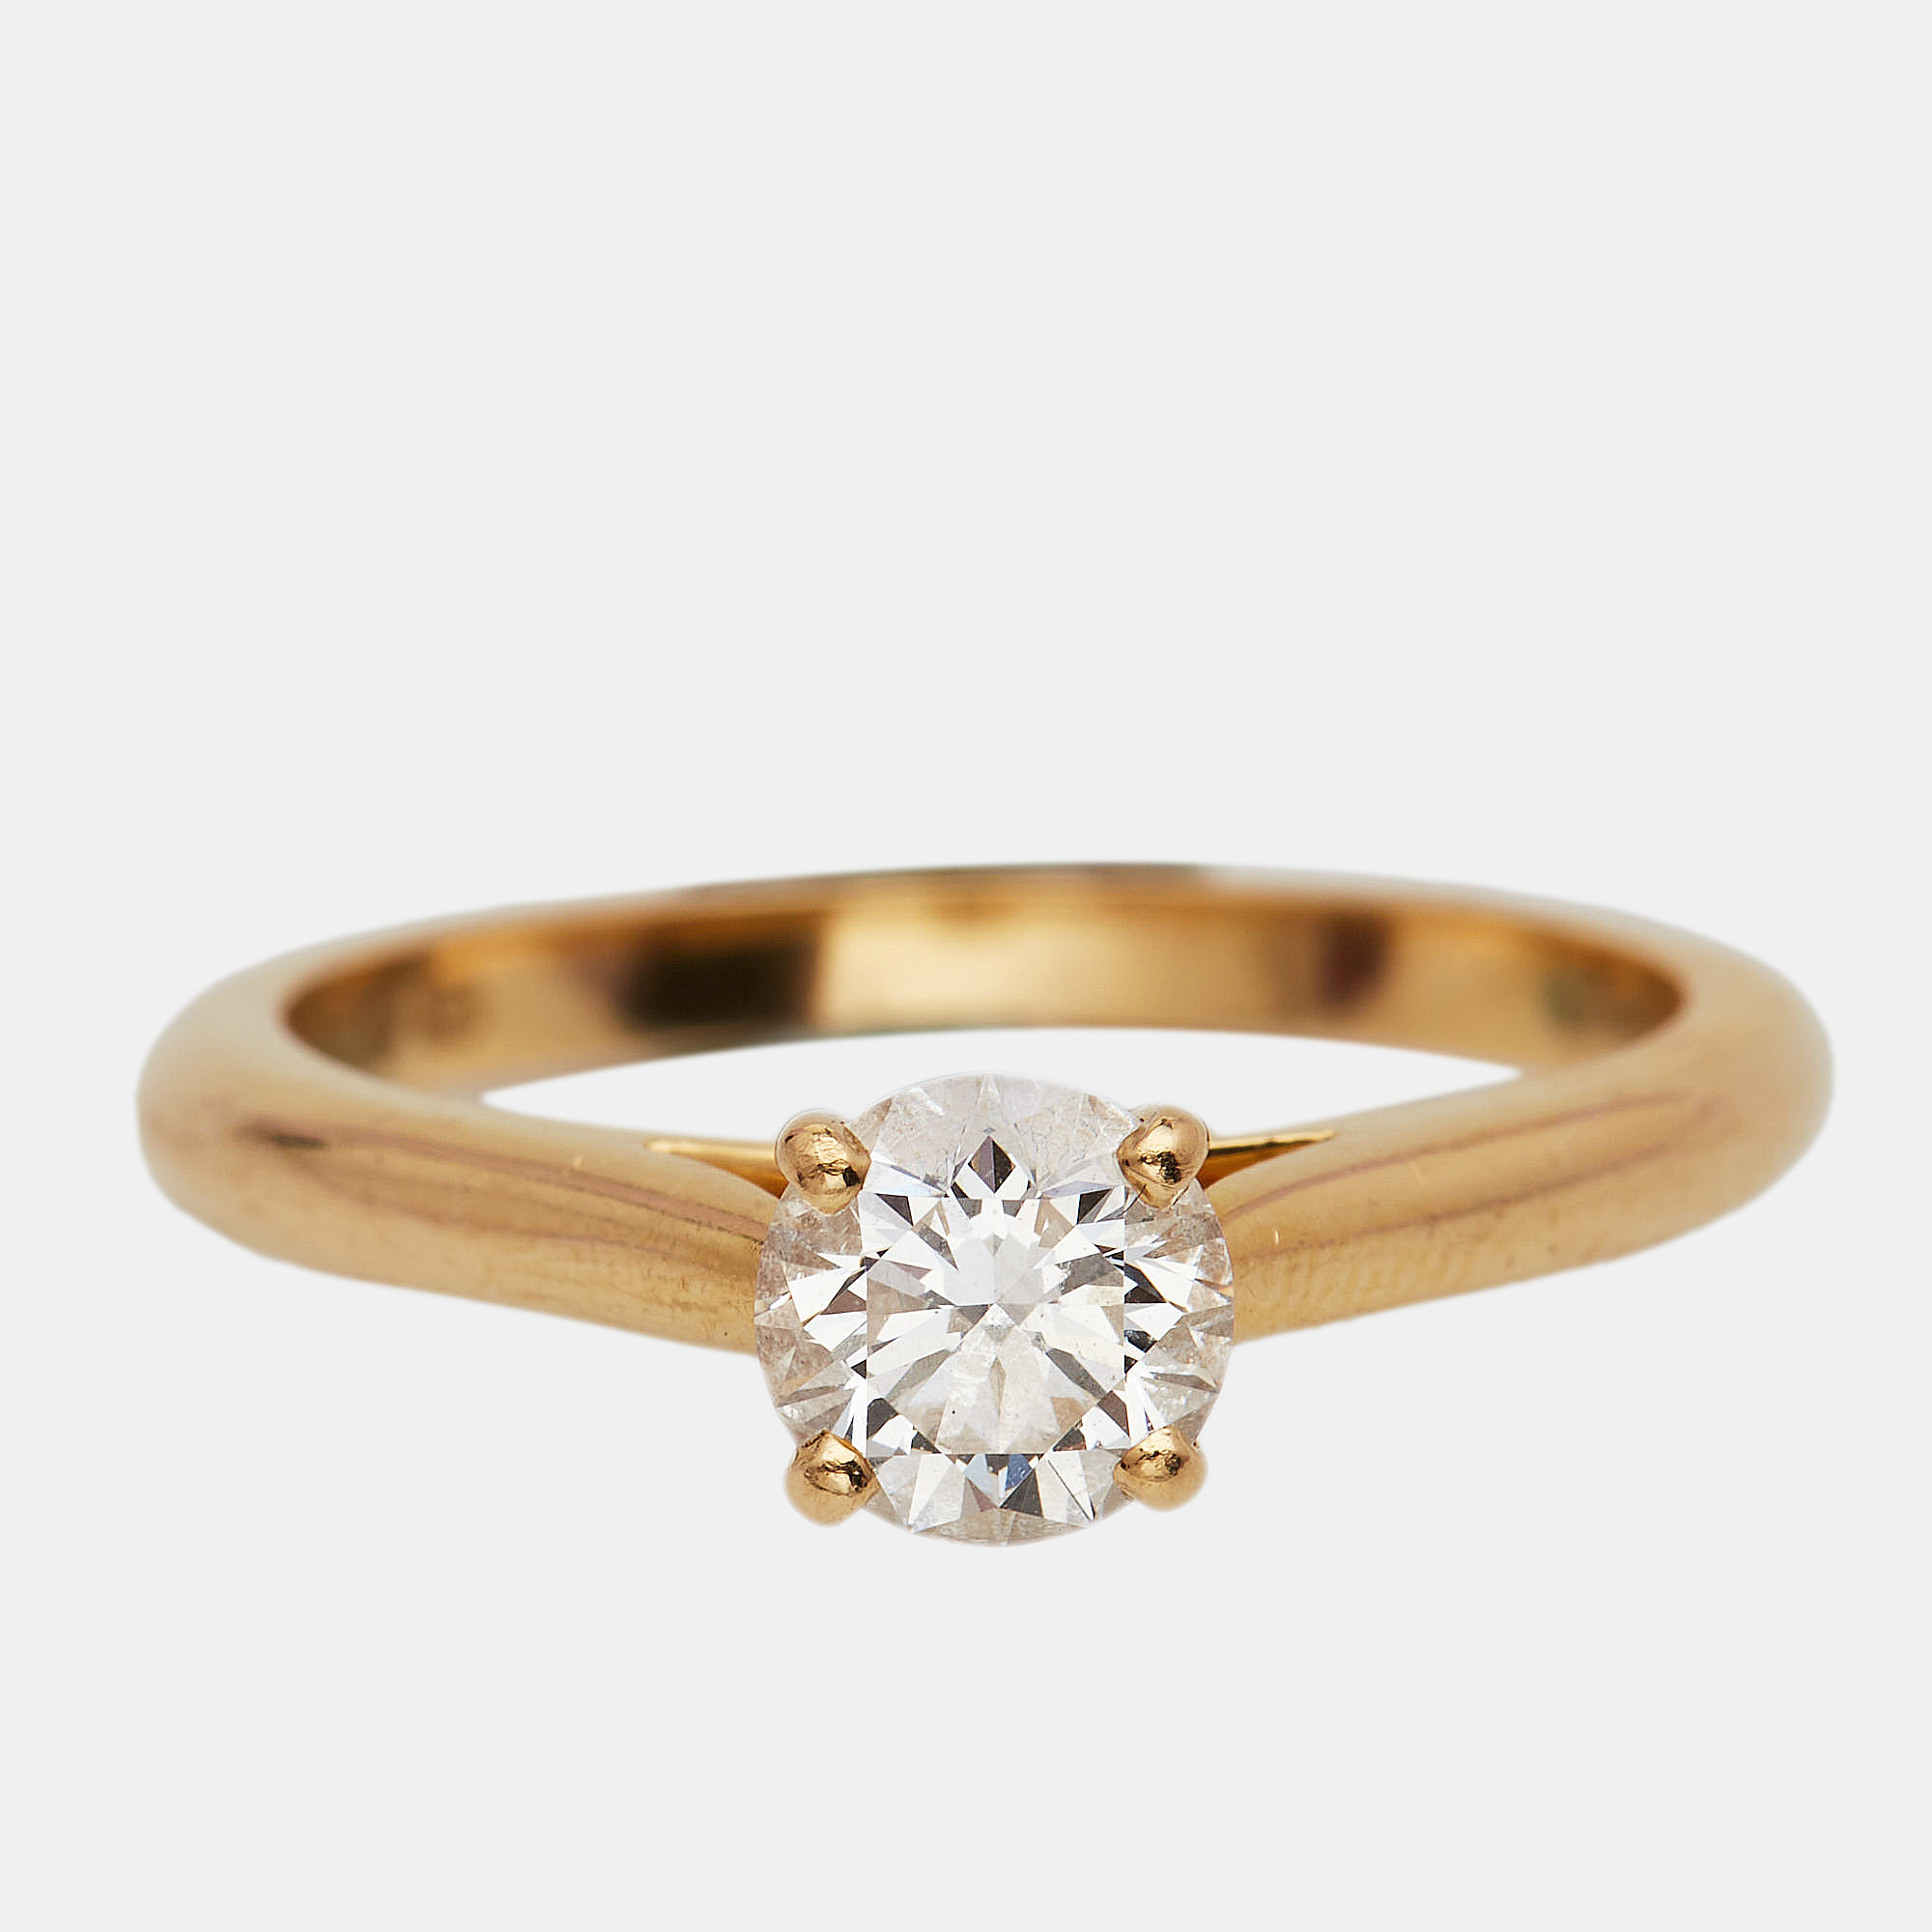  Cartier 1895 Diamond 18k Yellow Gold Solitare Ring Size 51